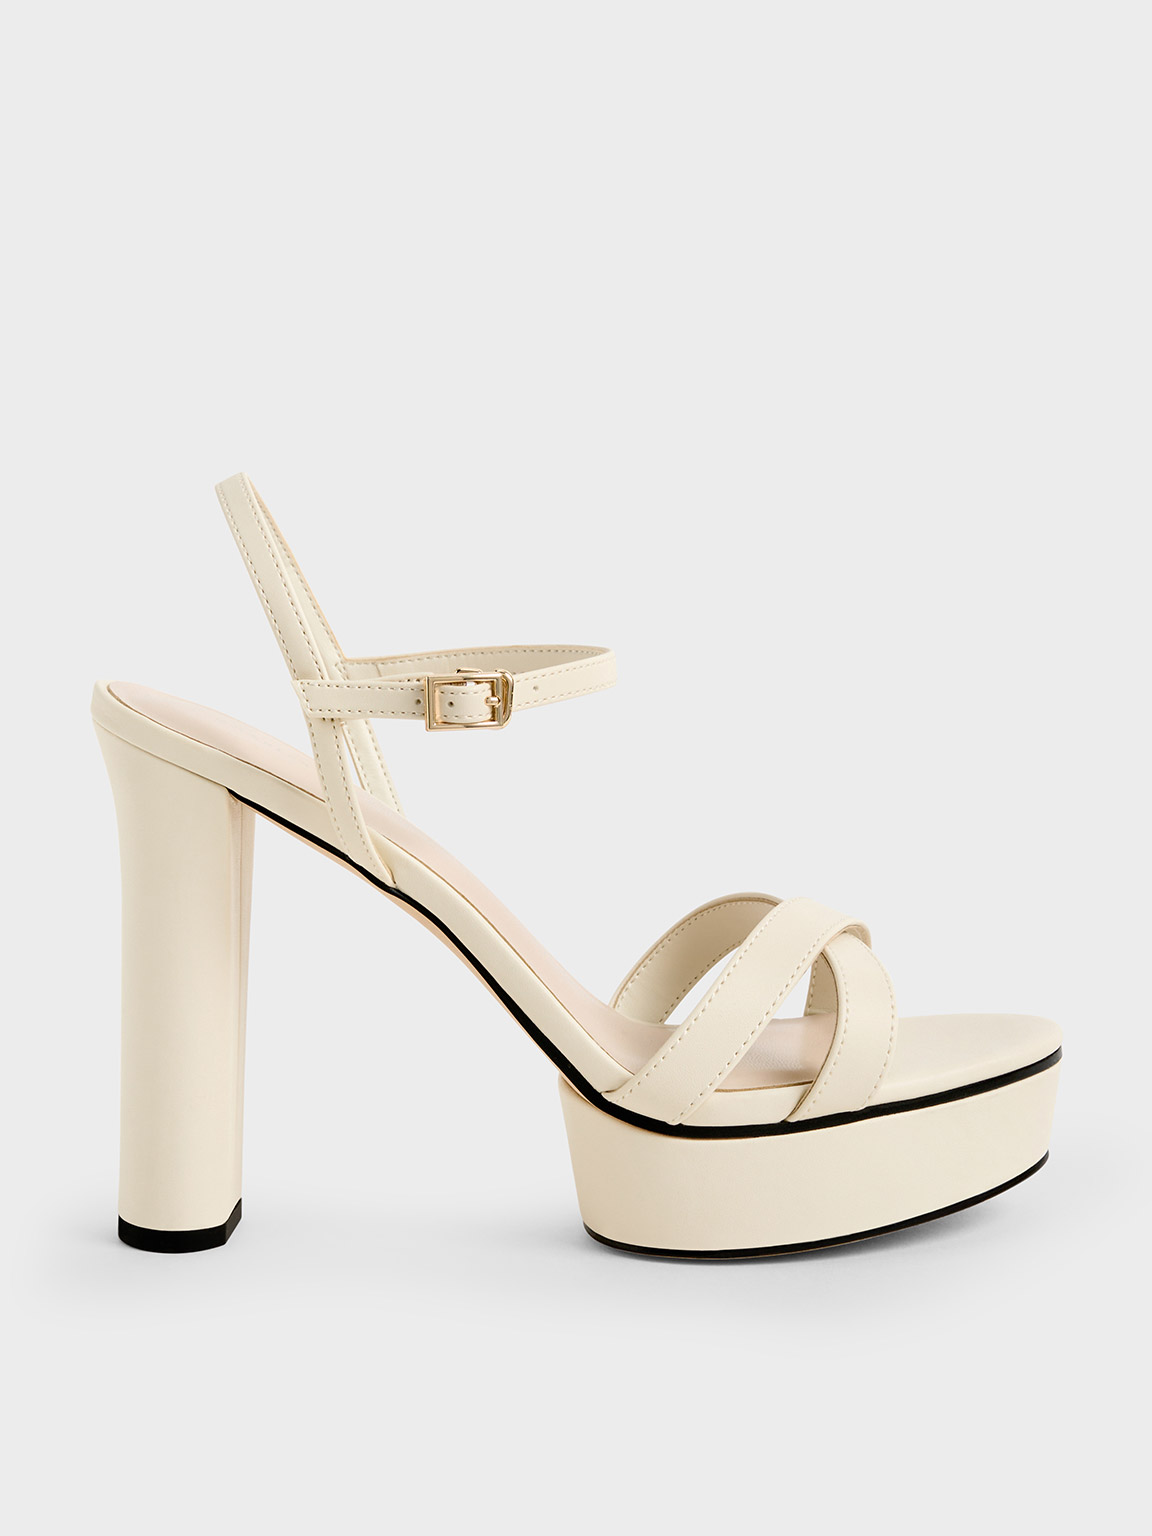 Charles & Keith Sling Back Statement Heeled Shoes in White | Lyst